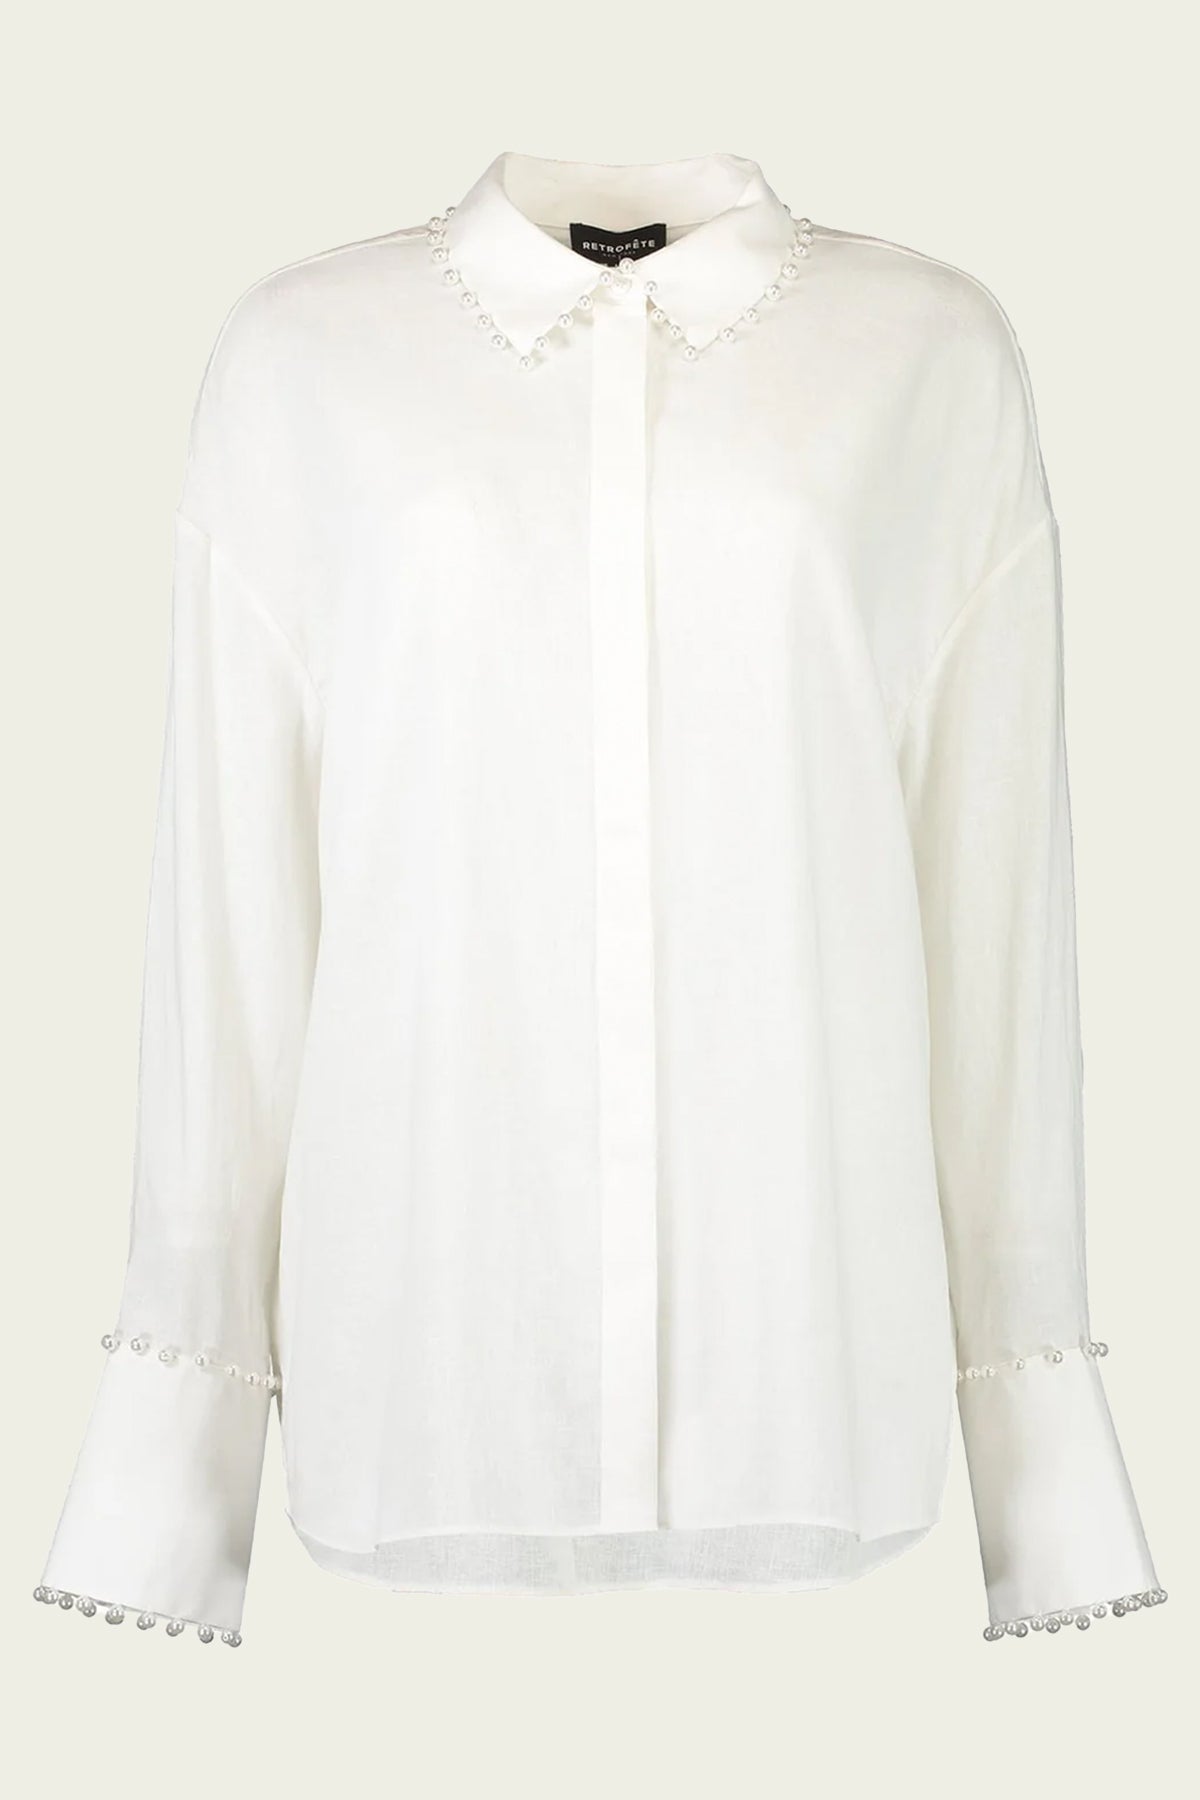 Whitley Pearl Embellished Shirt in White - shop - olivia.com